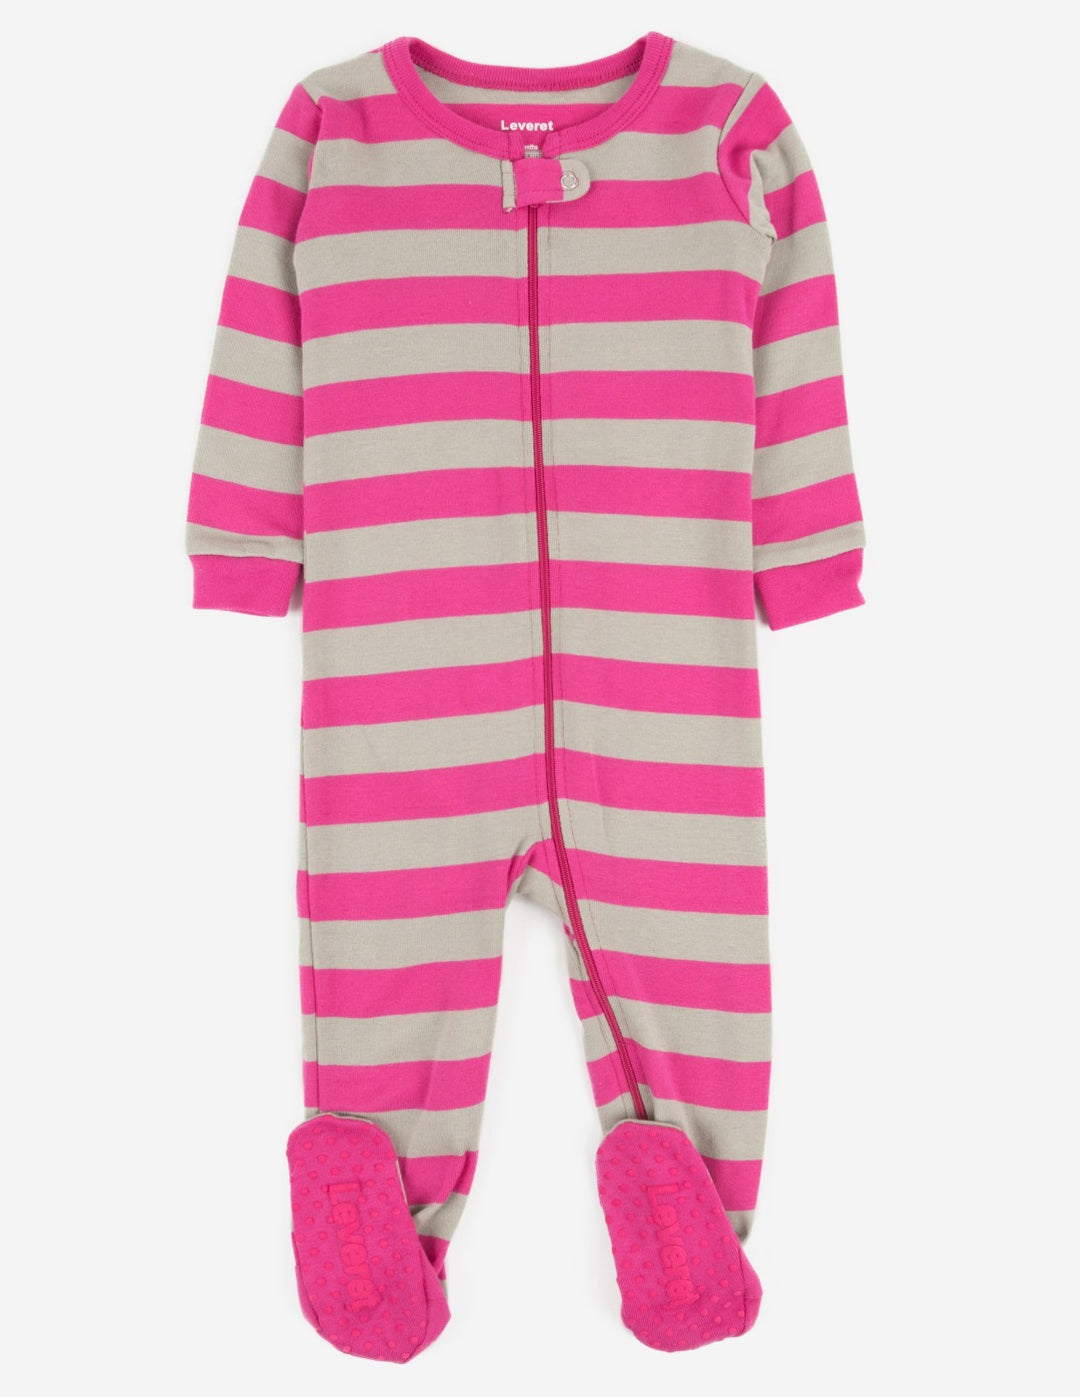 pink and cream striped baby footed pajamas